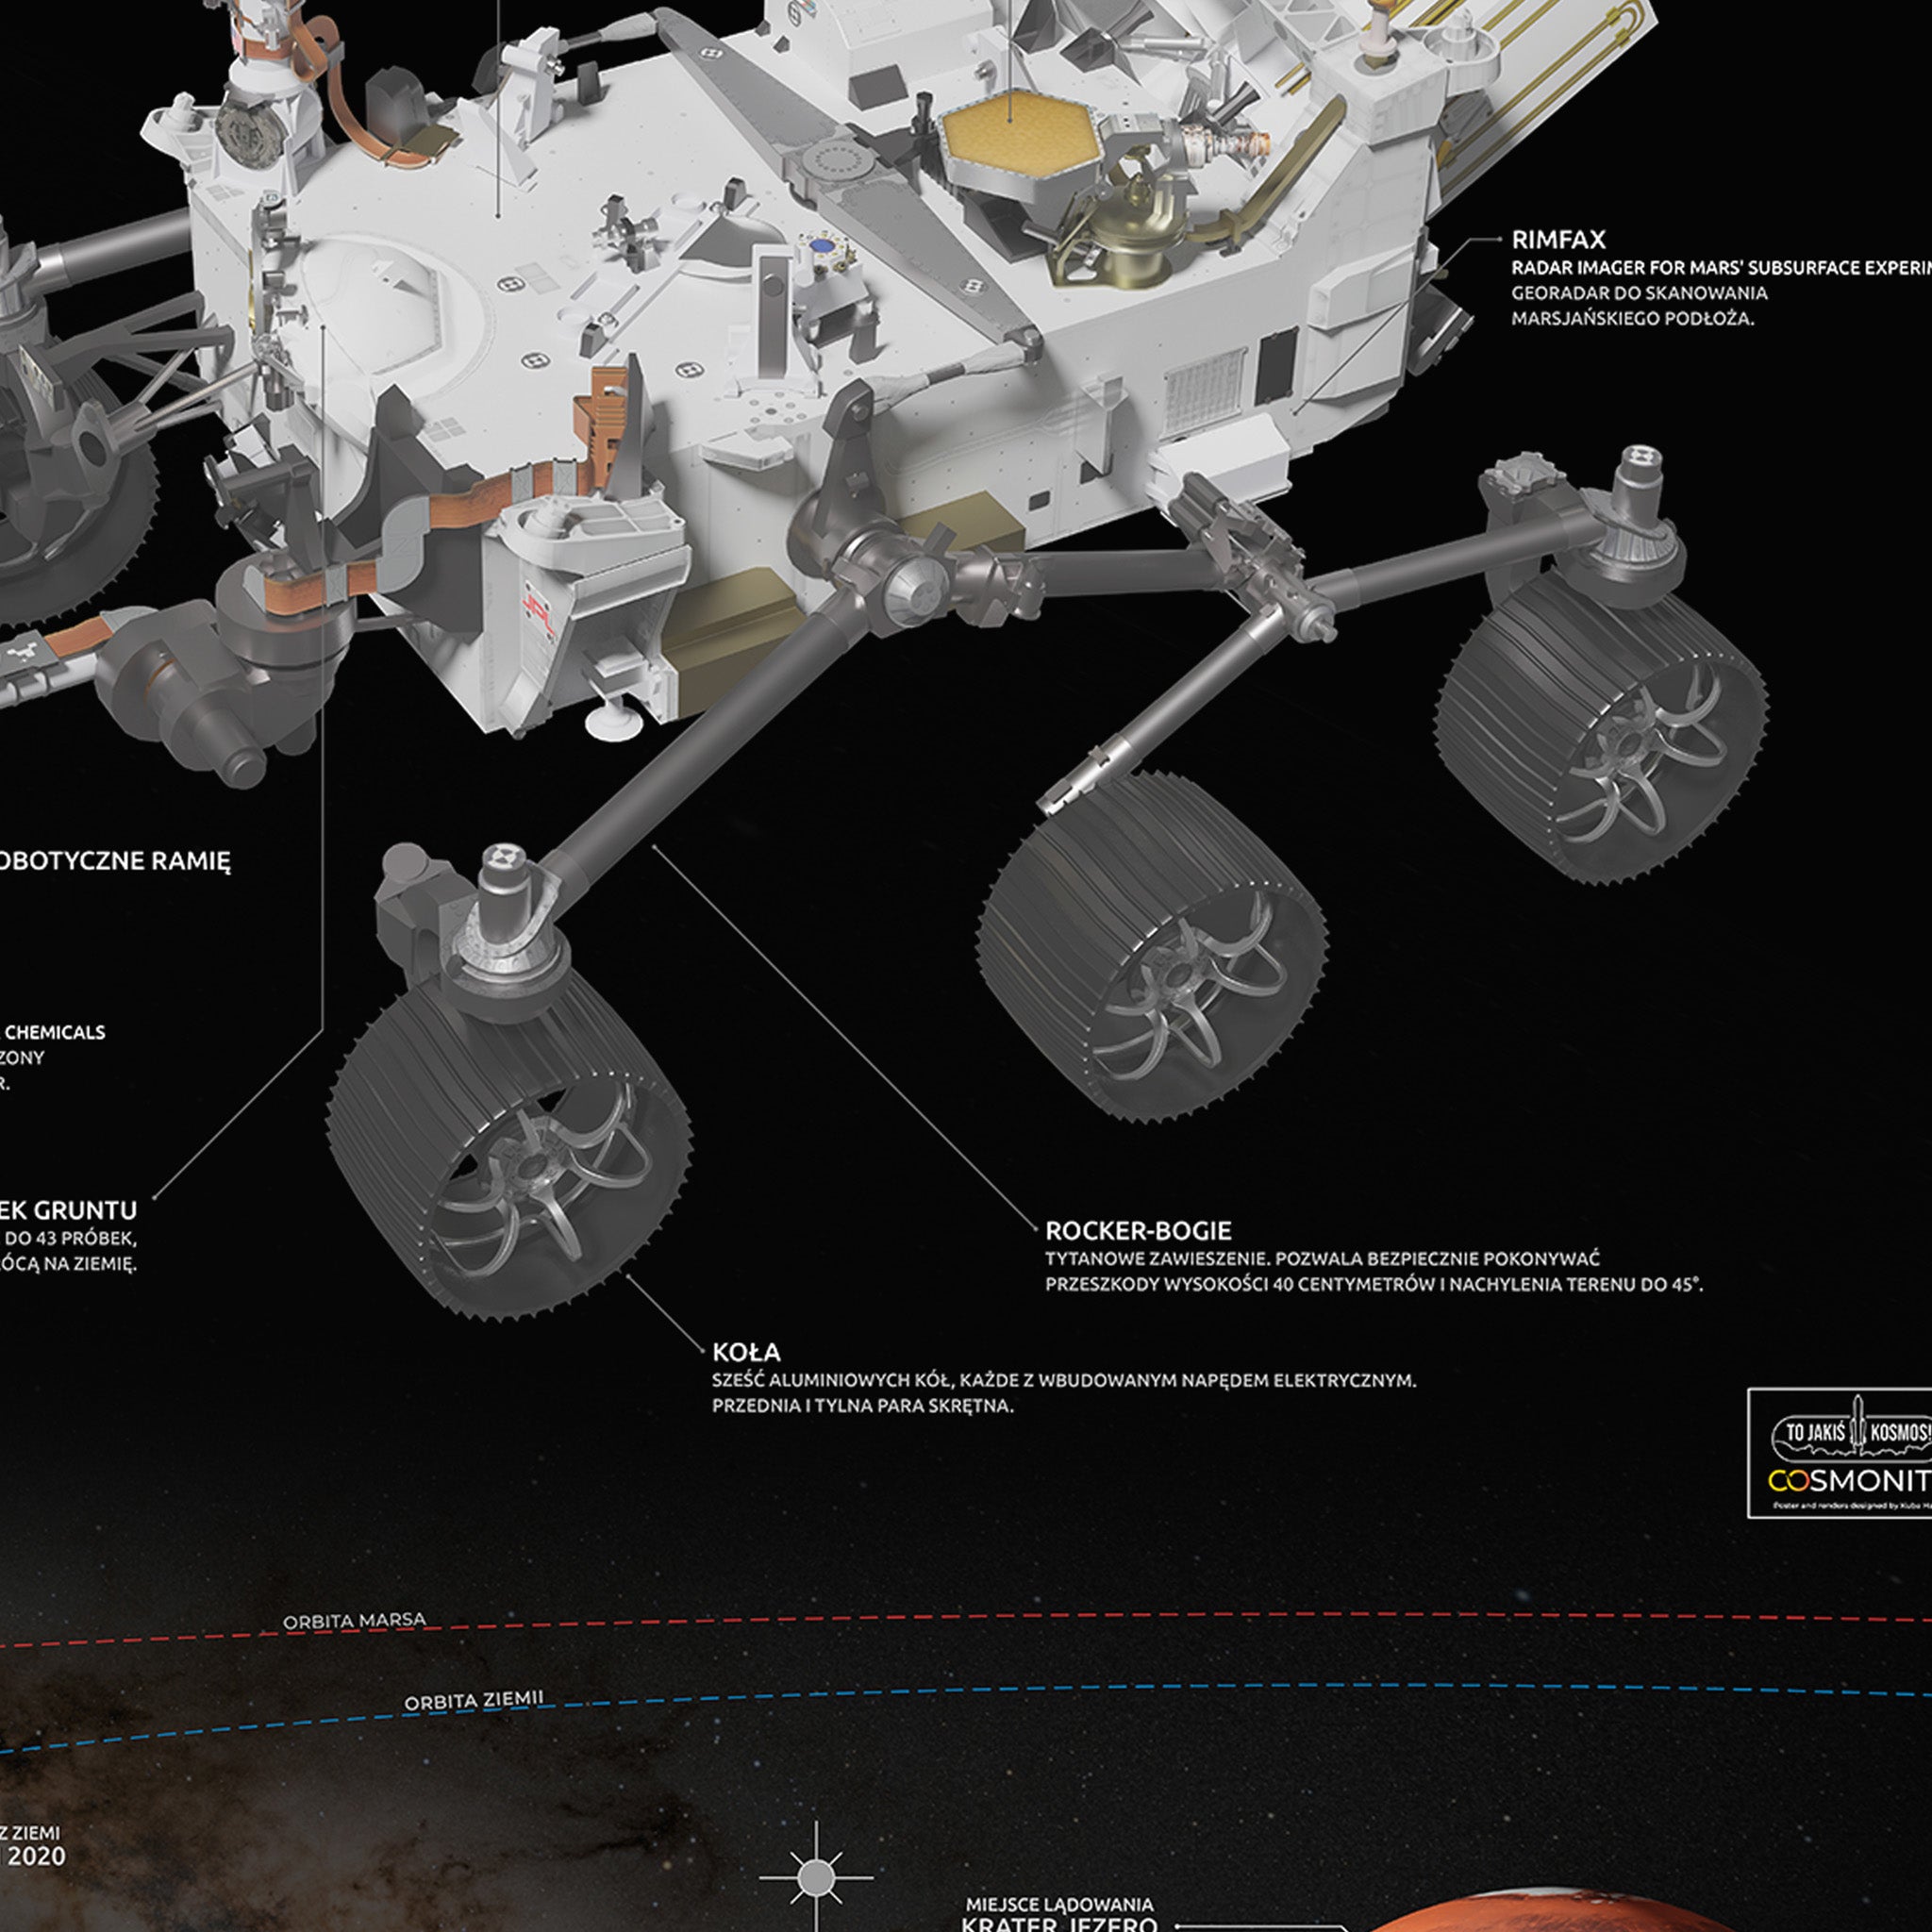 Perseverance Rover Infographic